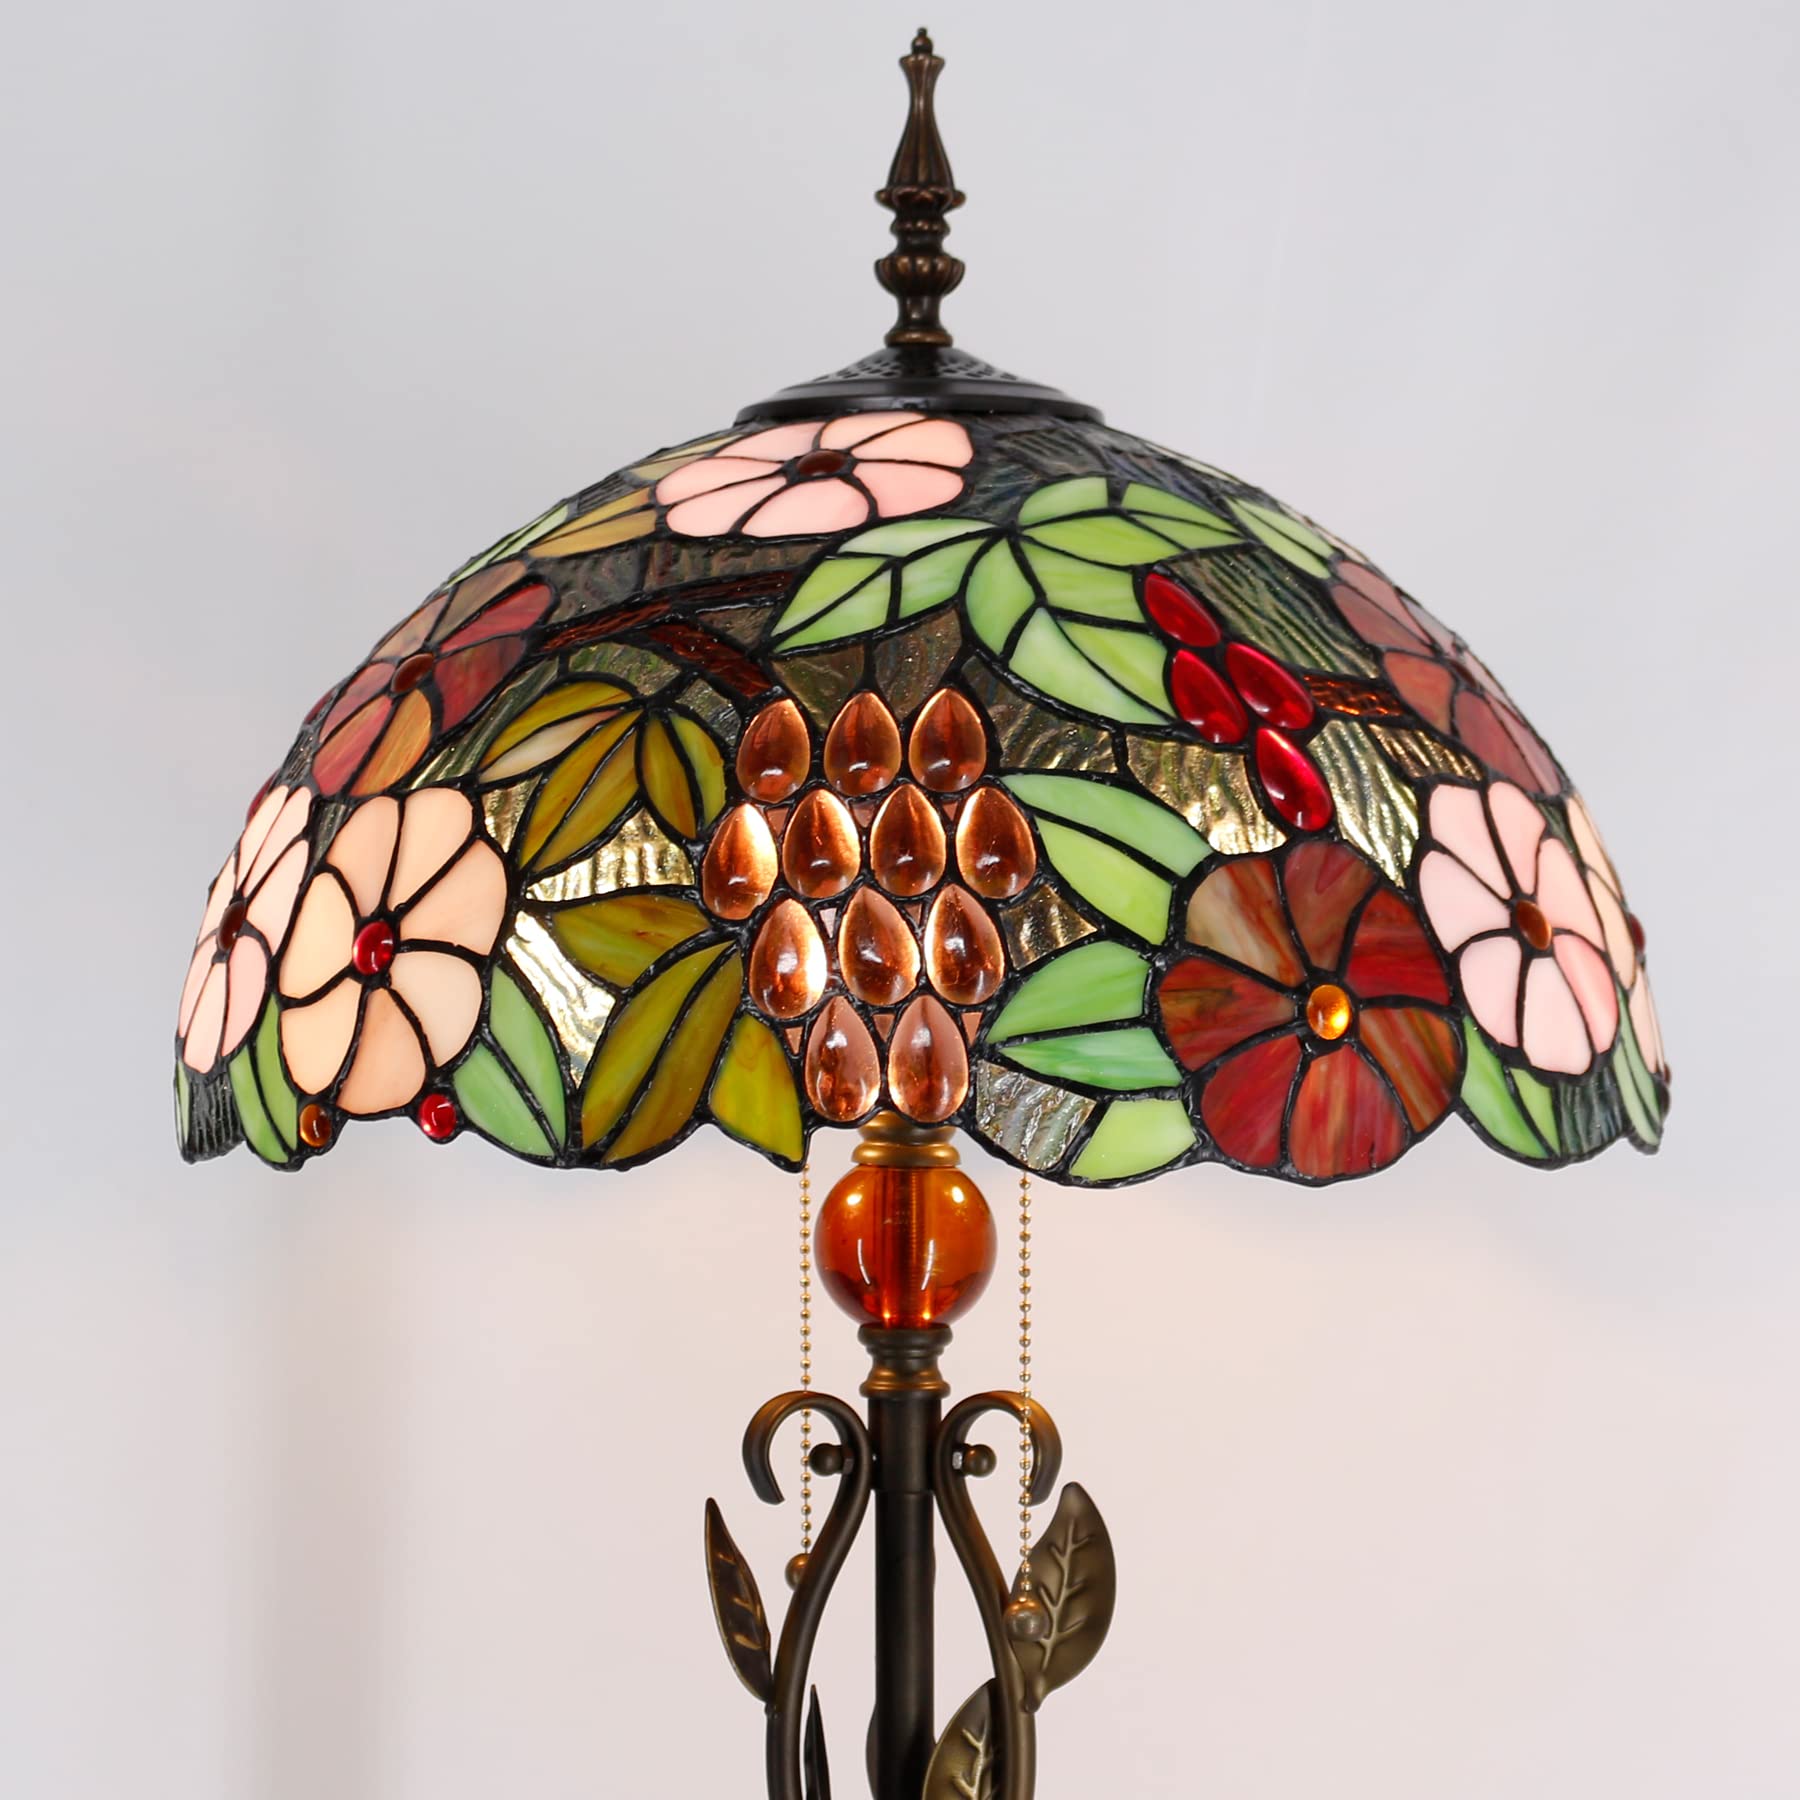 AVIVADIRECT Tiffany Floor Lamp Stained Glass Standing Reading Lamp 16x16x70 Inches Antique Pole Corner Light for Bedroom Living Room (Grapes Flower)